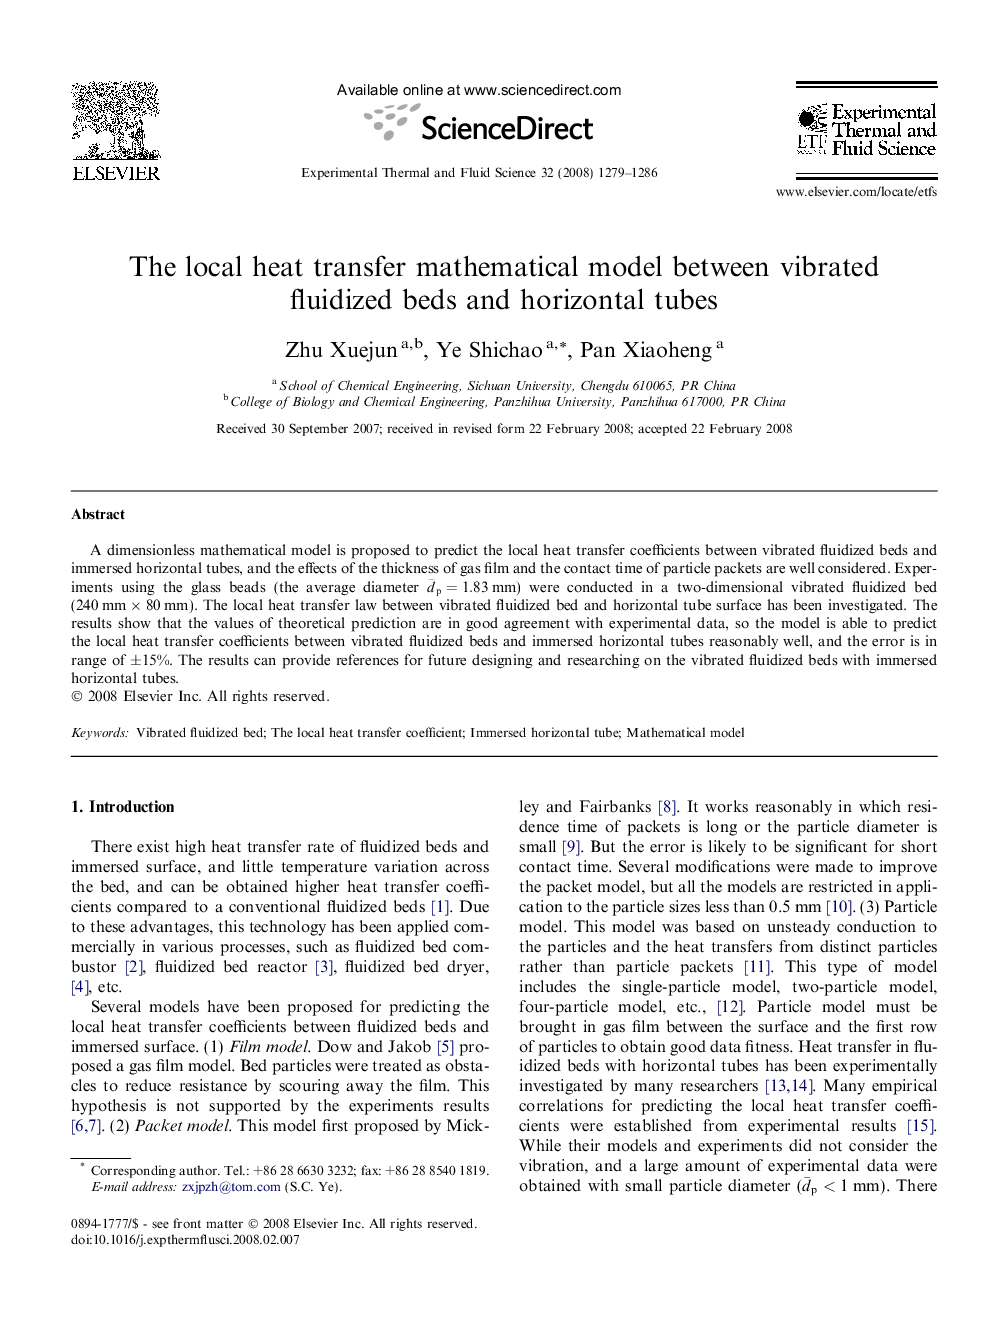 The local heat transfer mathematical model between vibrated fluidized beds and horizontal tubes